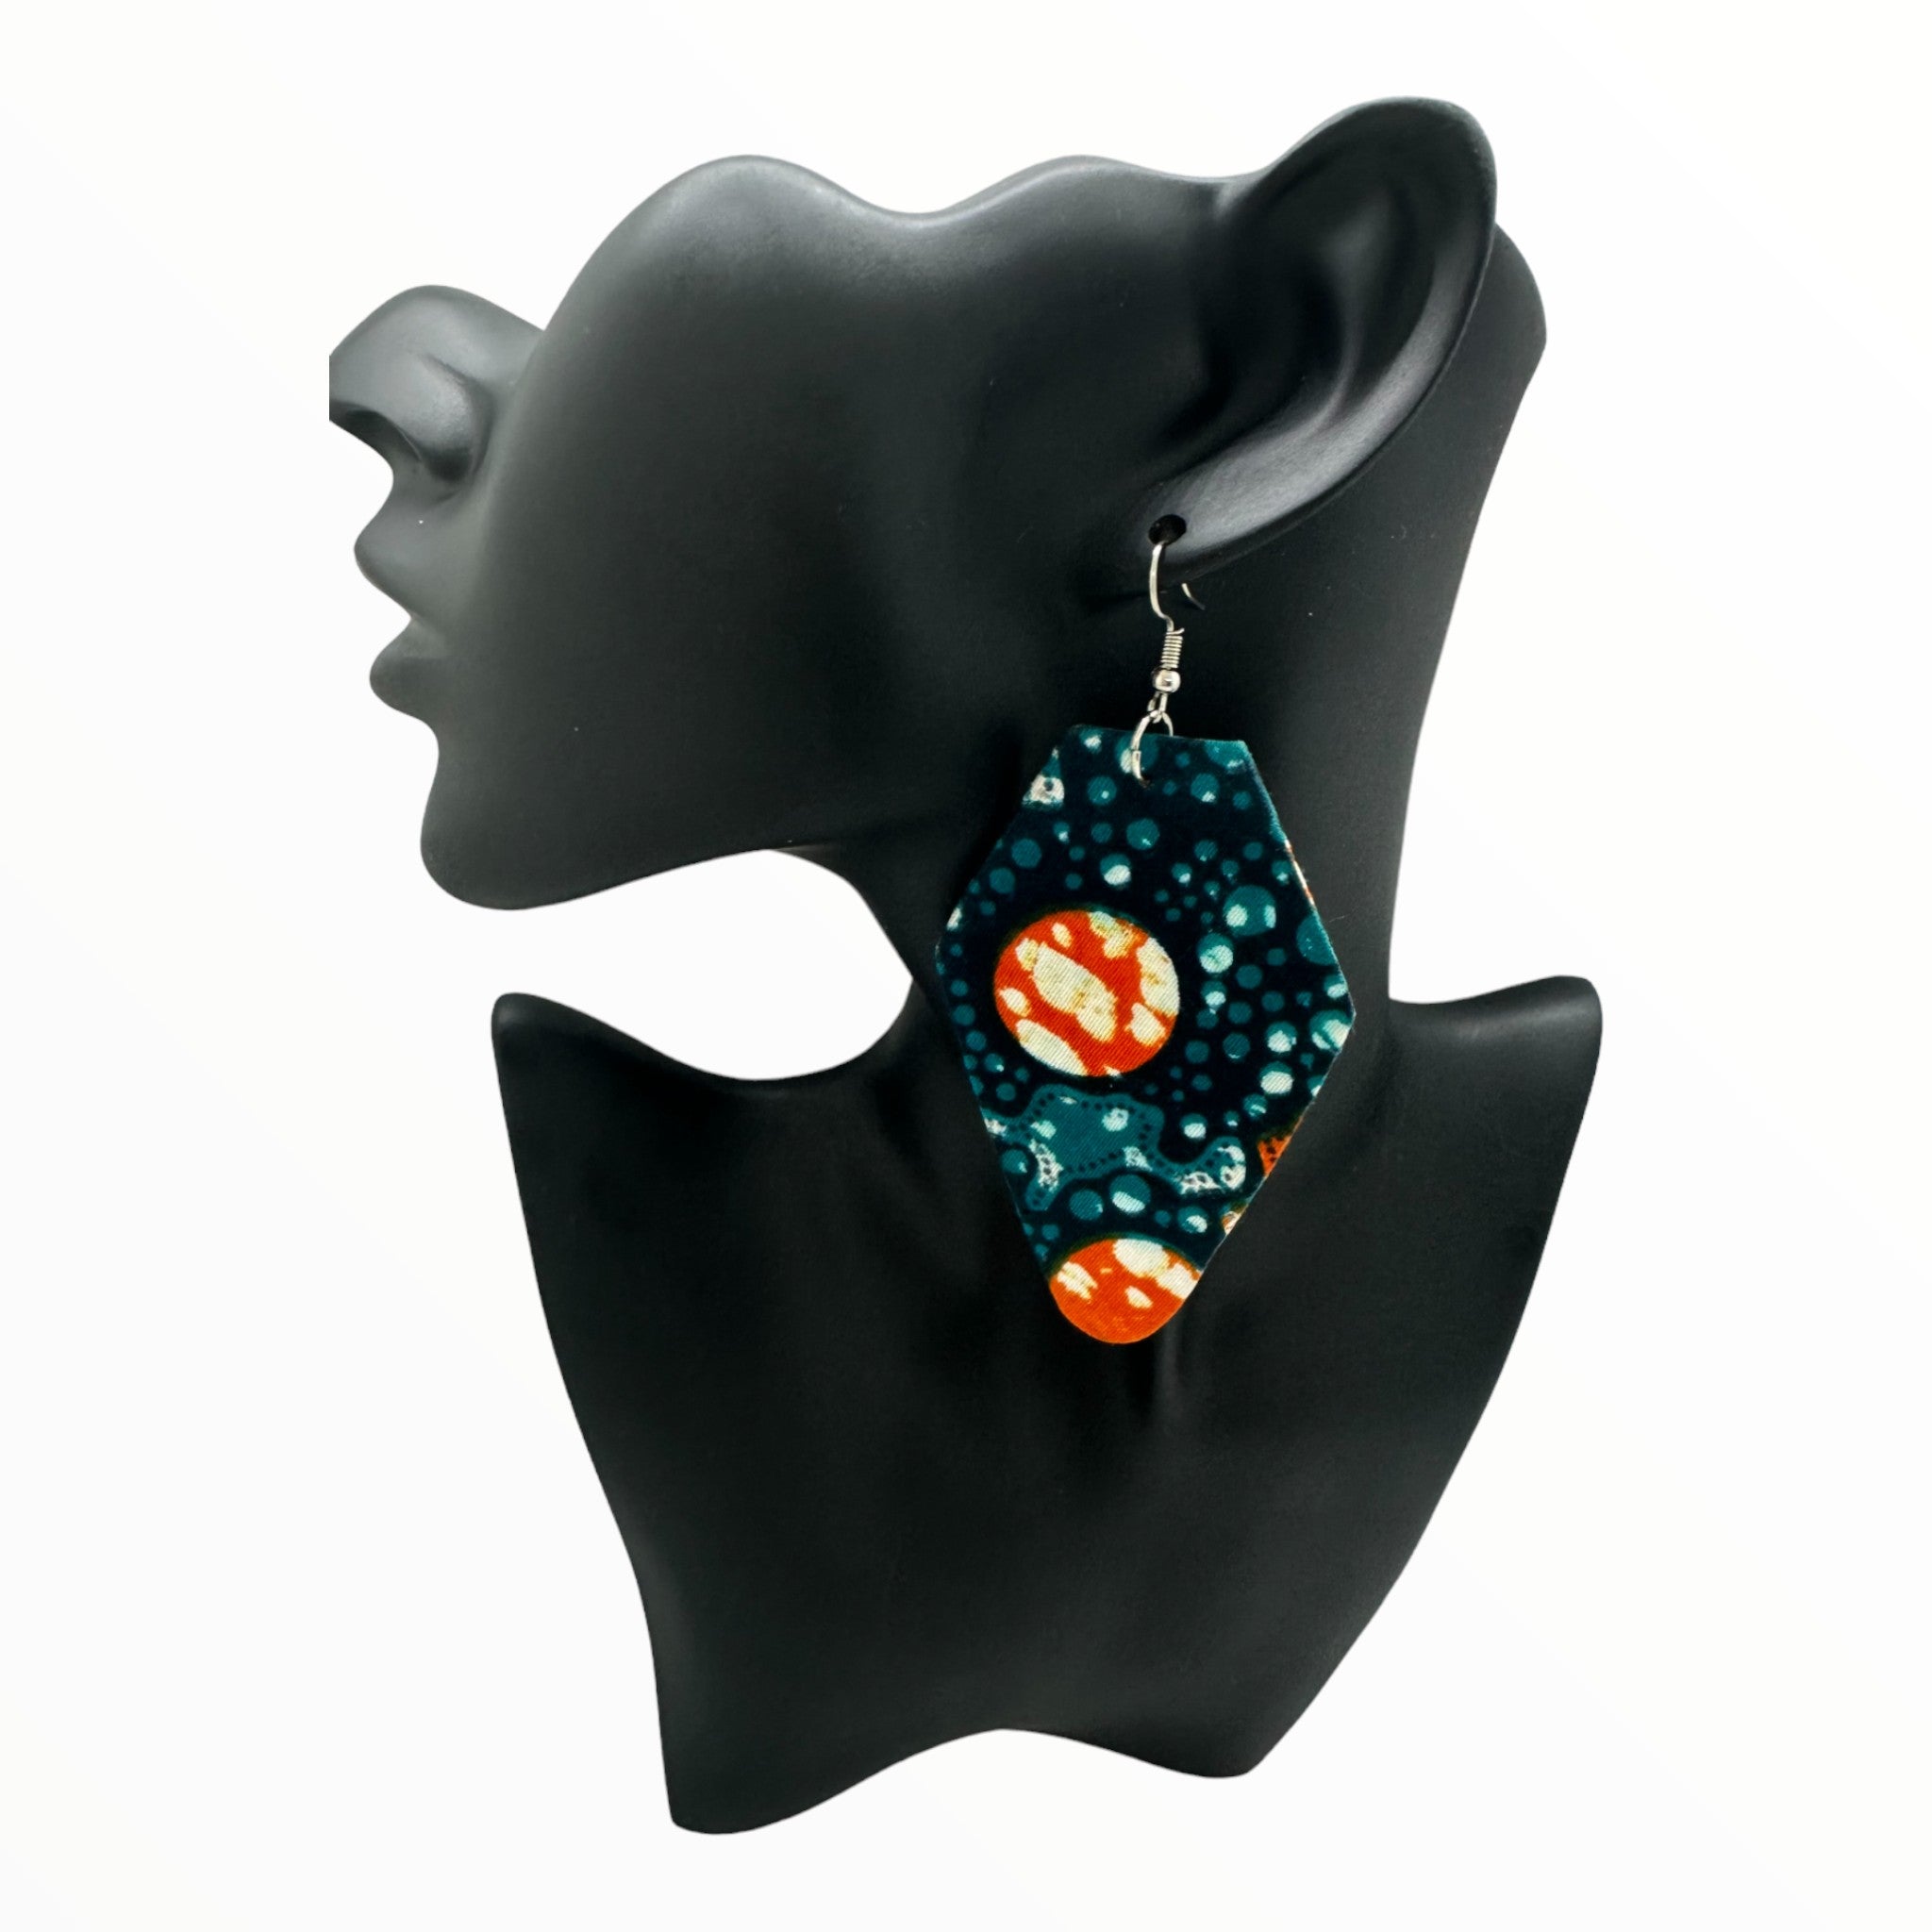 Afrocentric Ankara Fabric Earrings-Convex Polygon Shape (Turquoise and Orange)